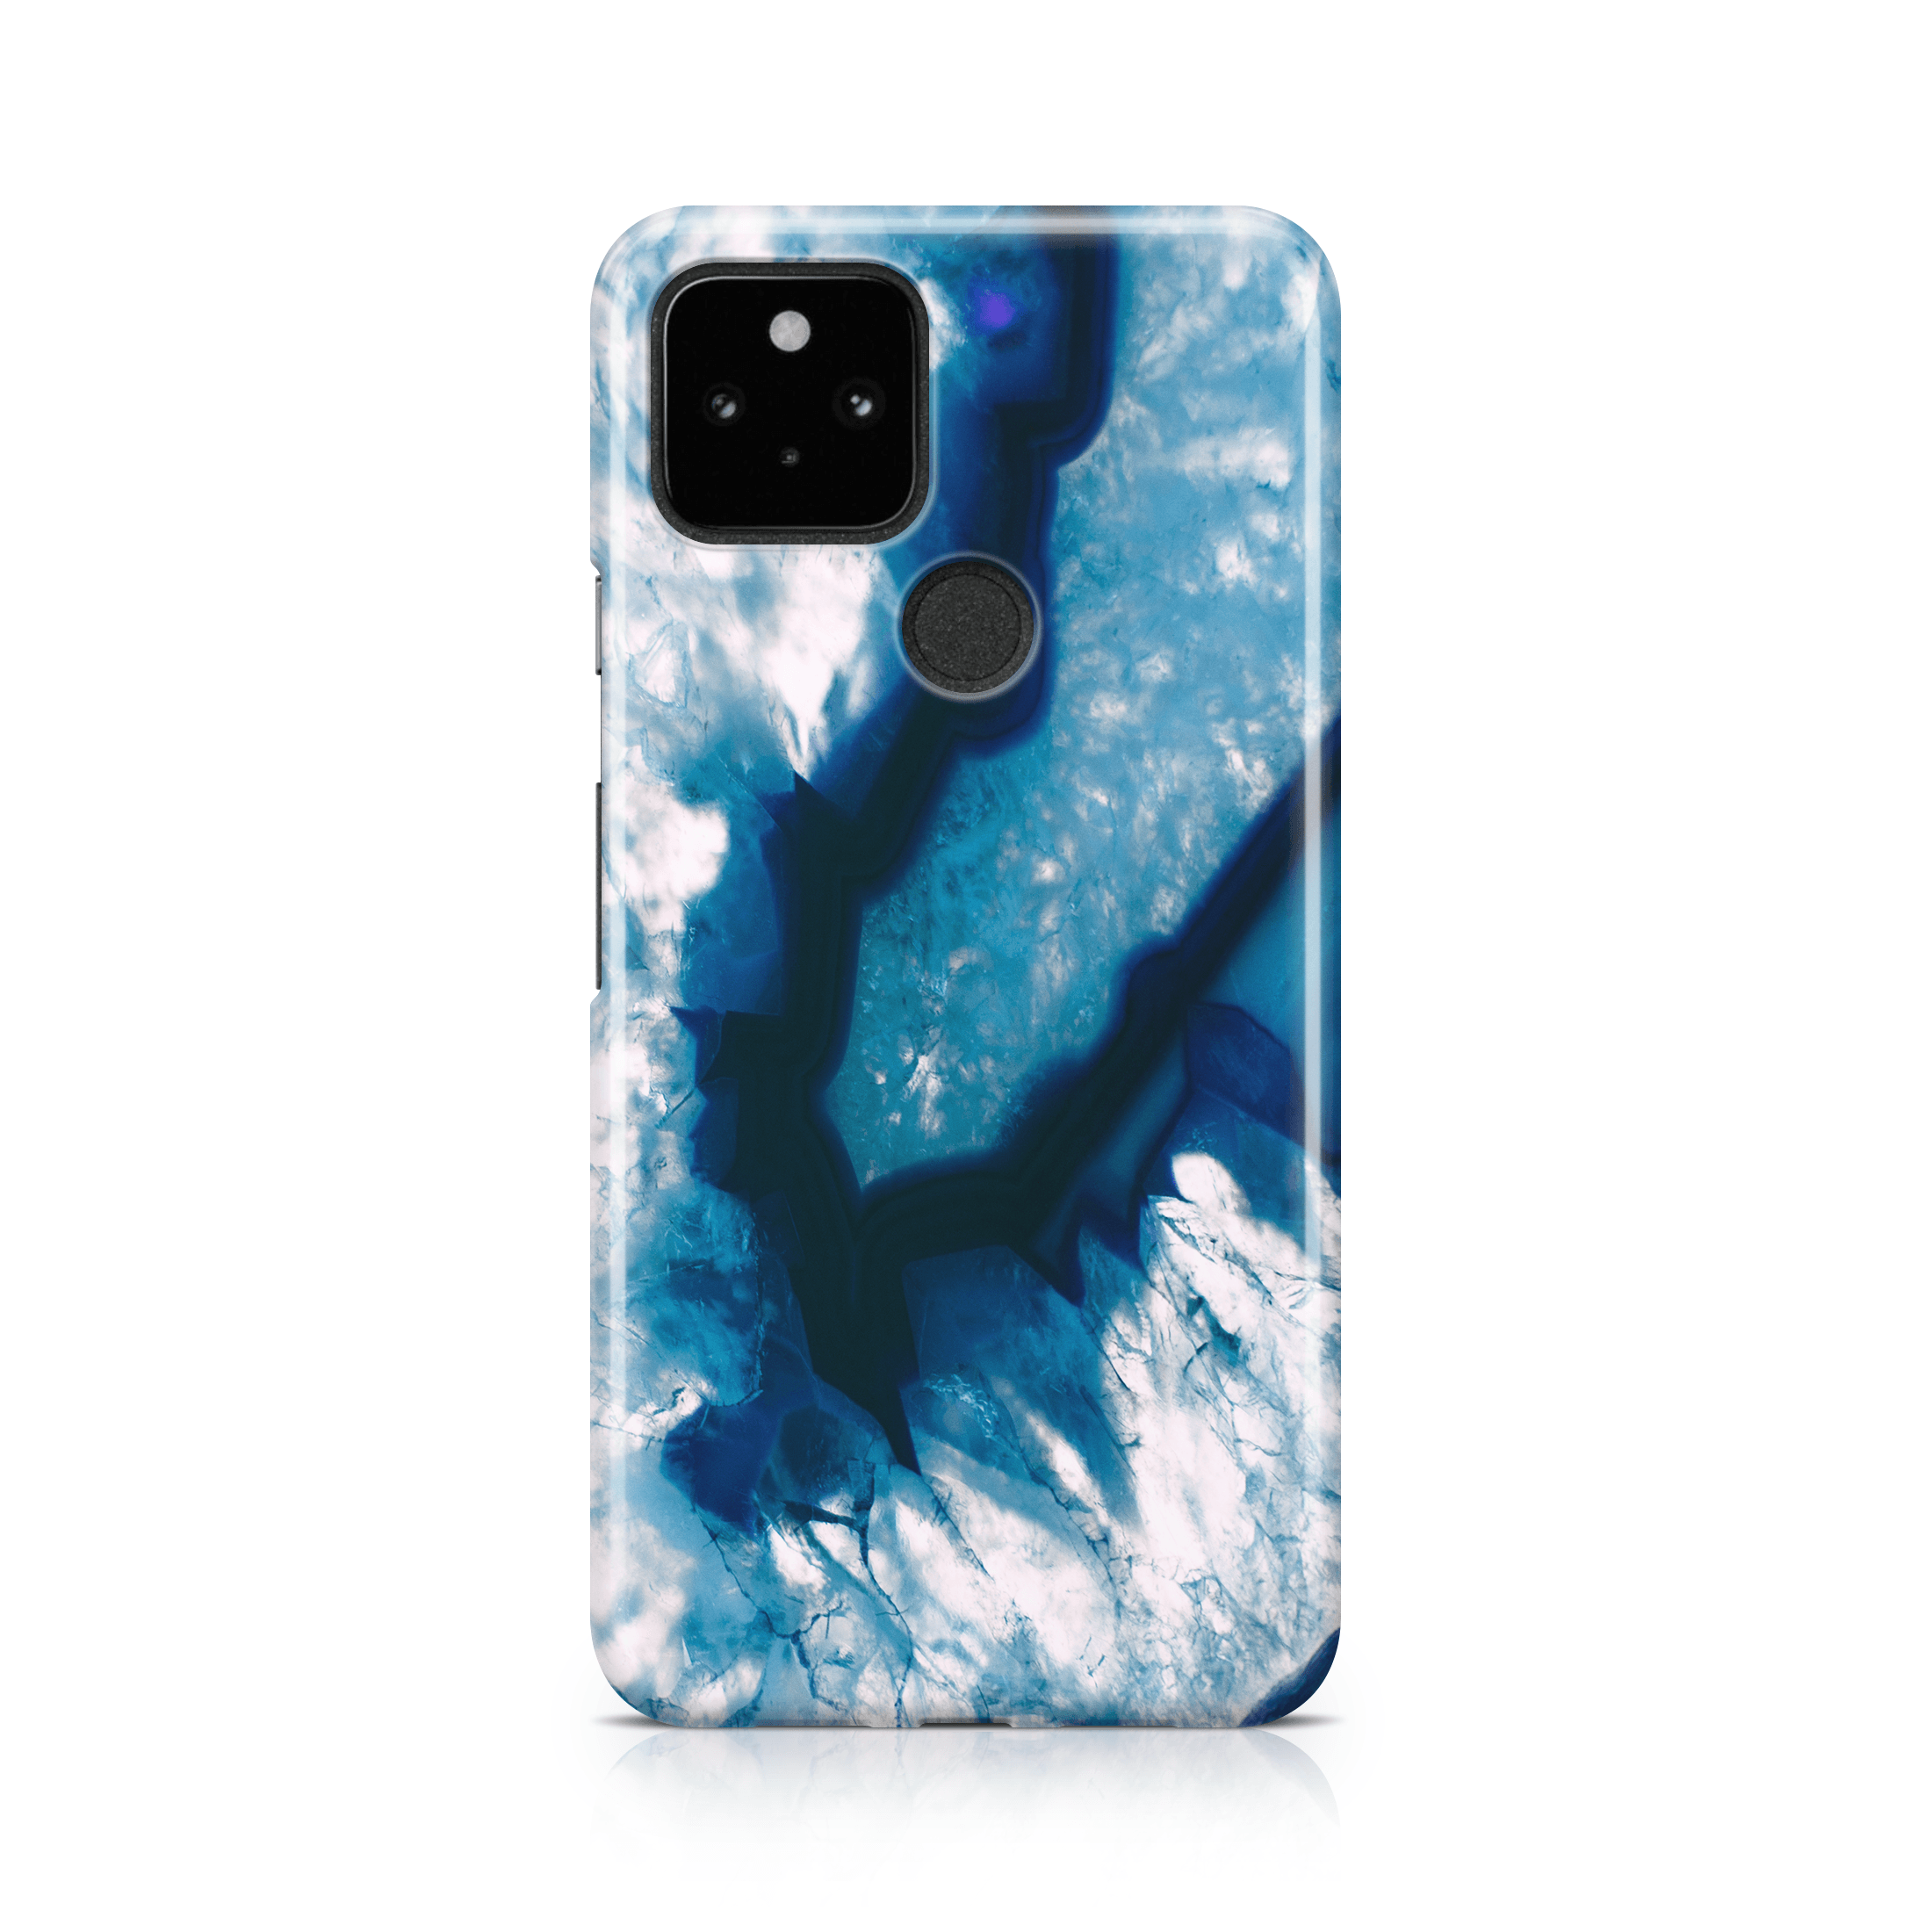 Blue Geode III - Google phone case designs by CaseSwagger